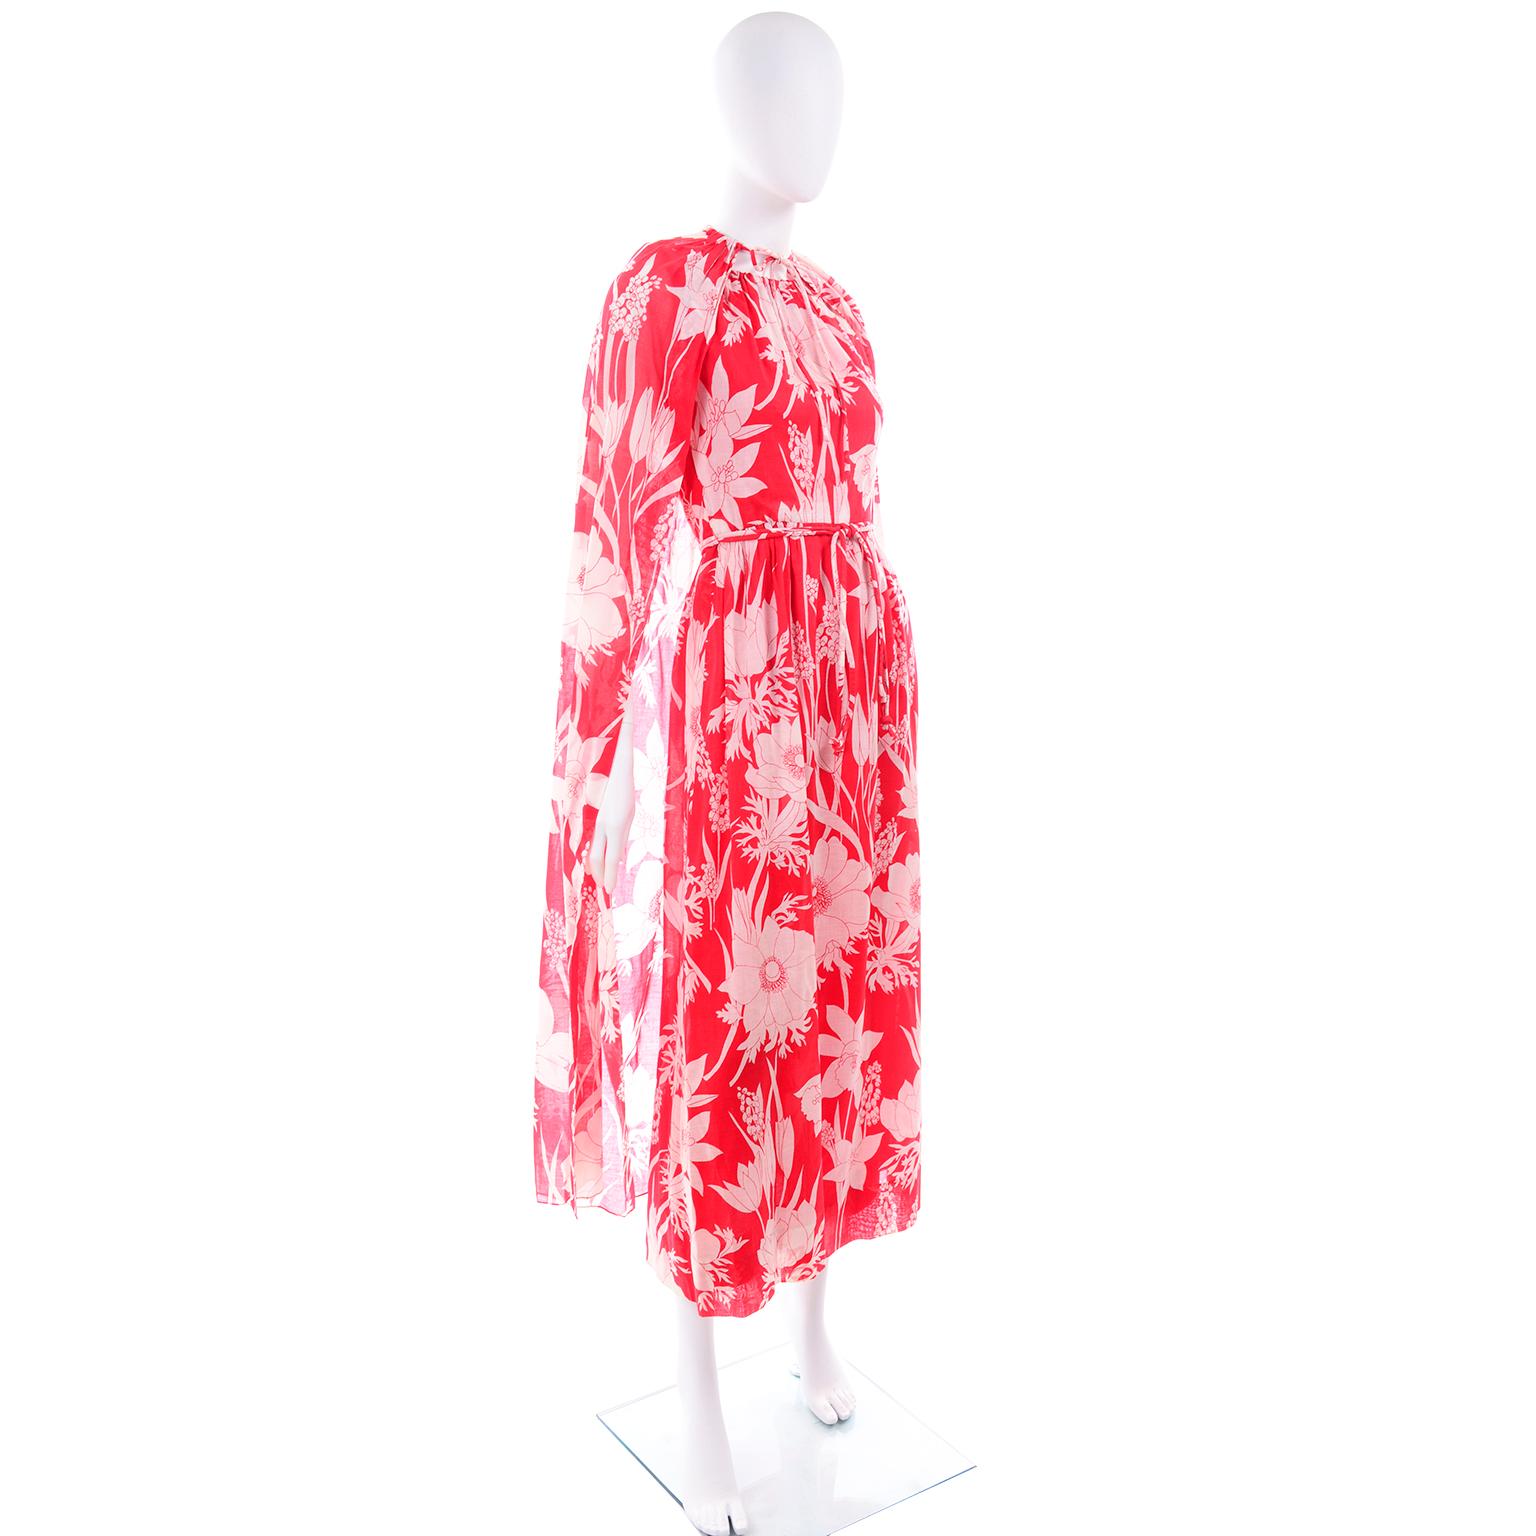 Pink Adele Simpson Vintage 1970s Dress & Cape in Red & White Cotton Floral Print 